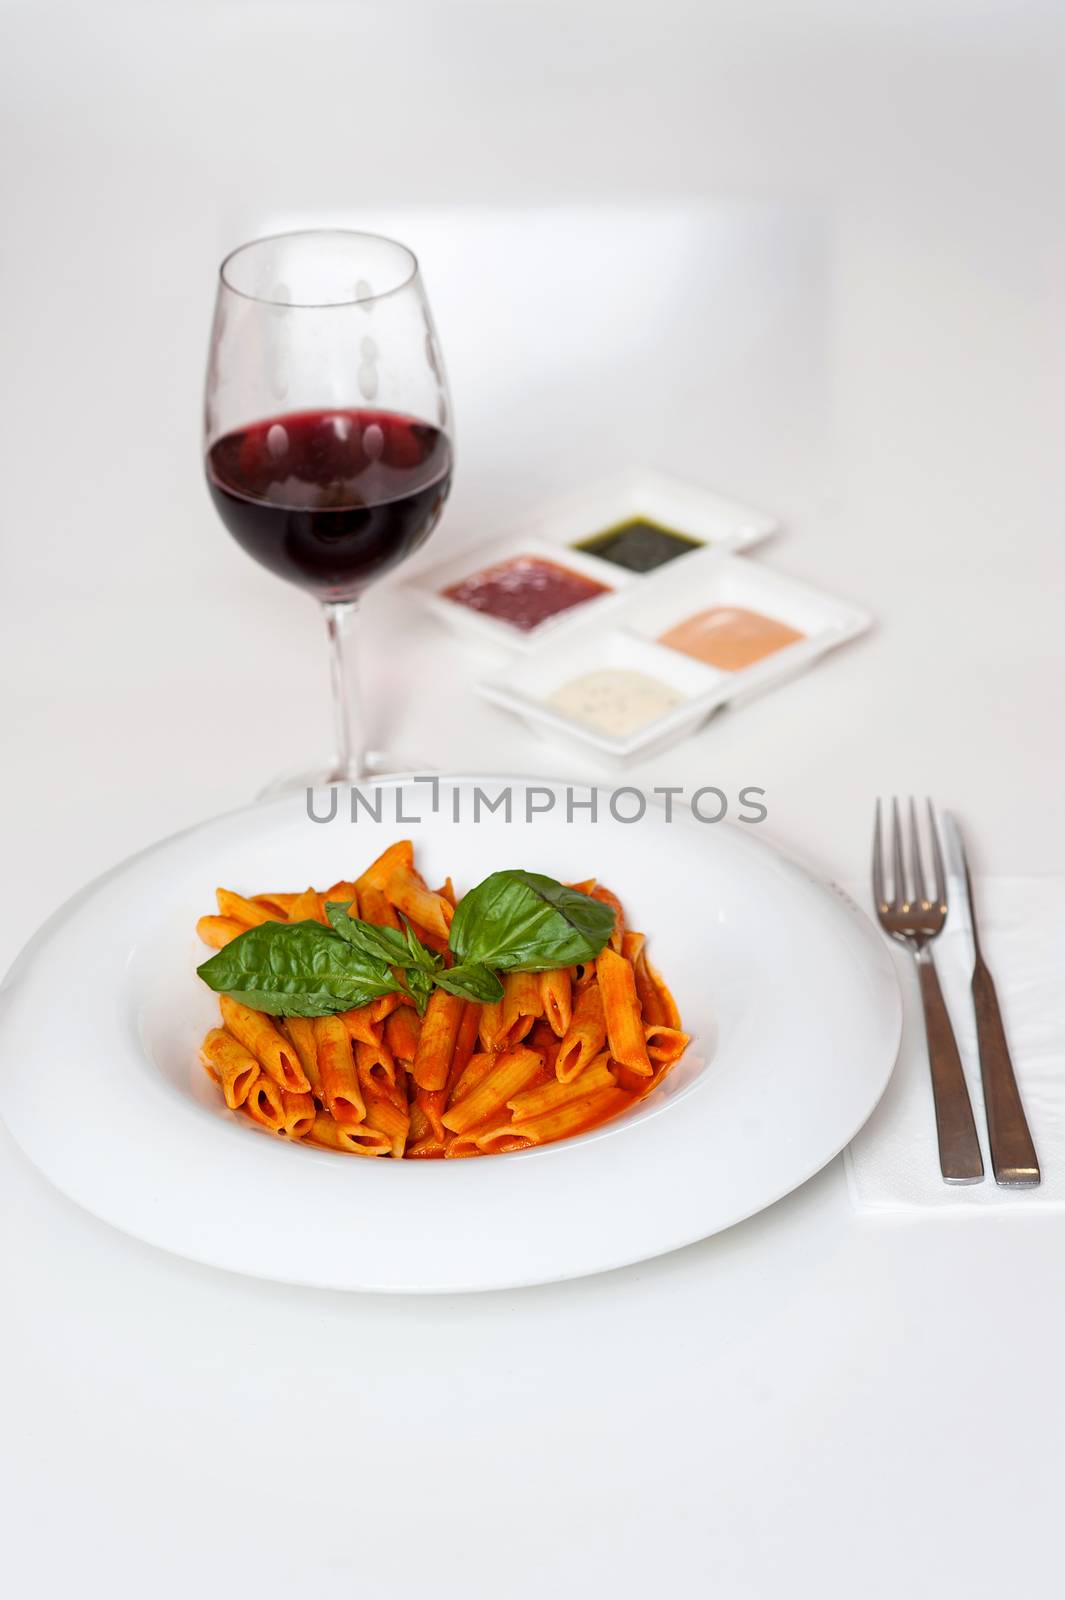 Yummy pasta served with sauces and red wine